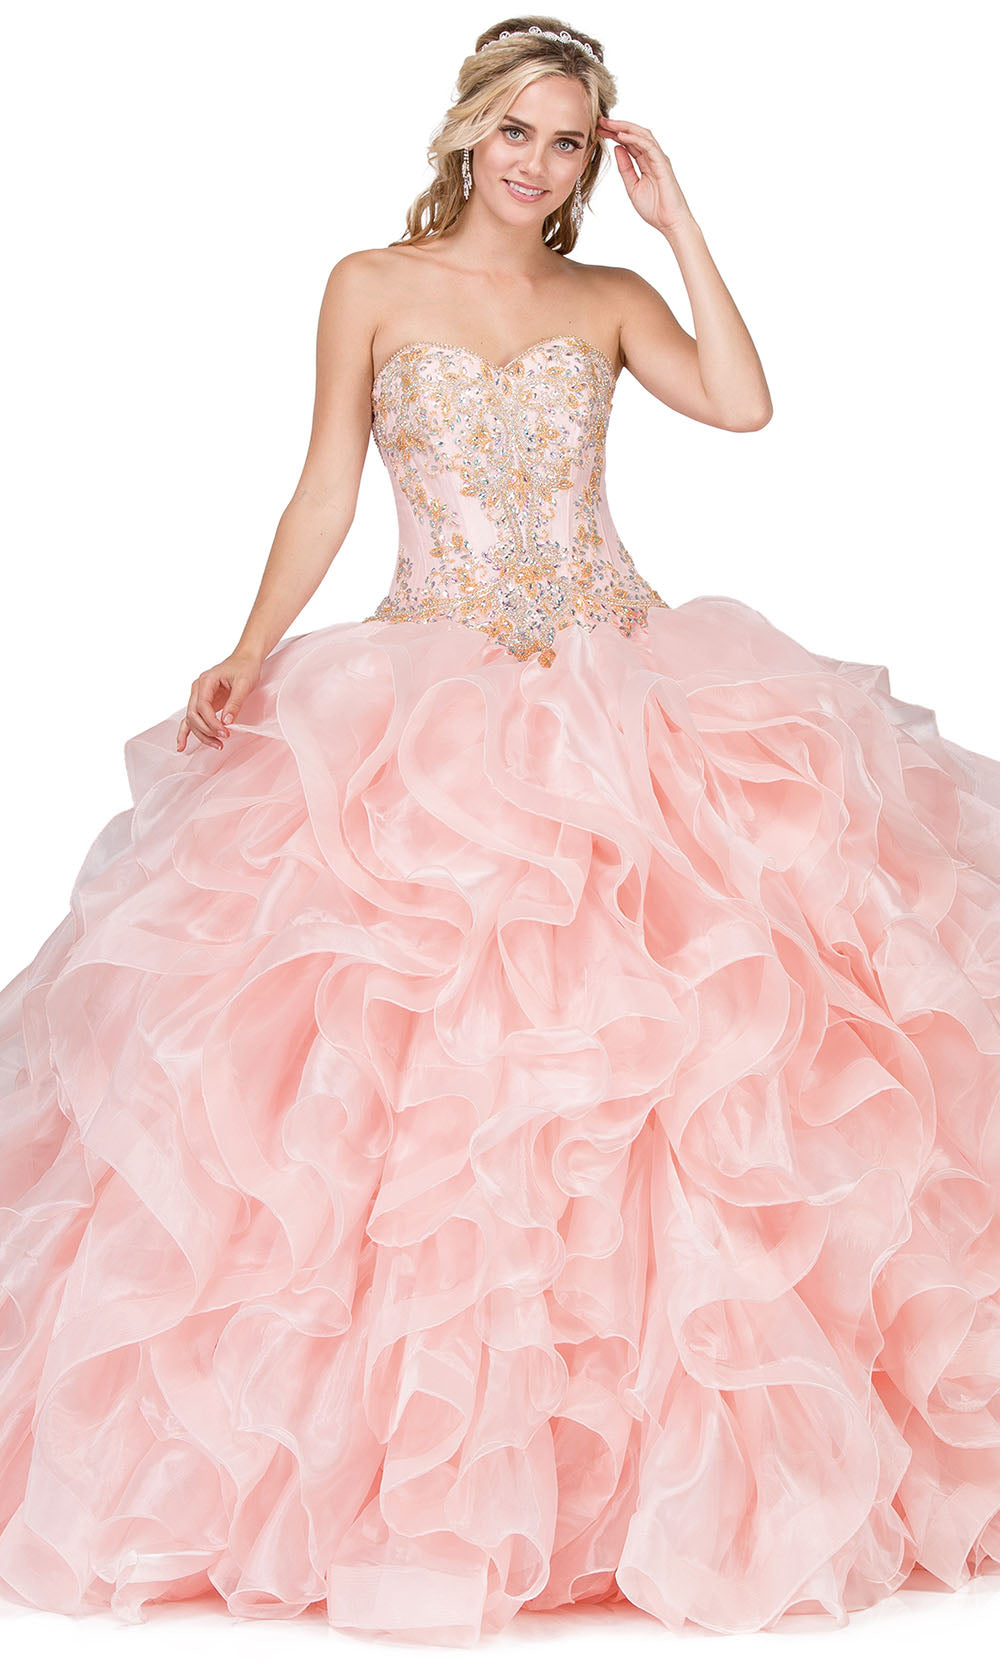 Dancing Queen - 1250 Strapless Jeweled Corset Bodice Ballgown In Pink